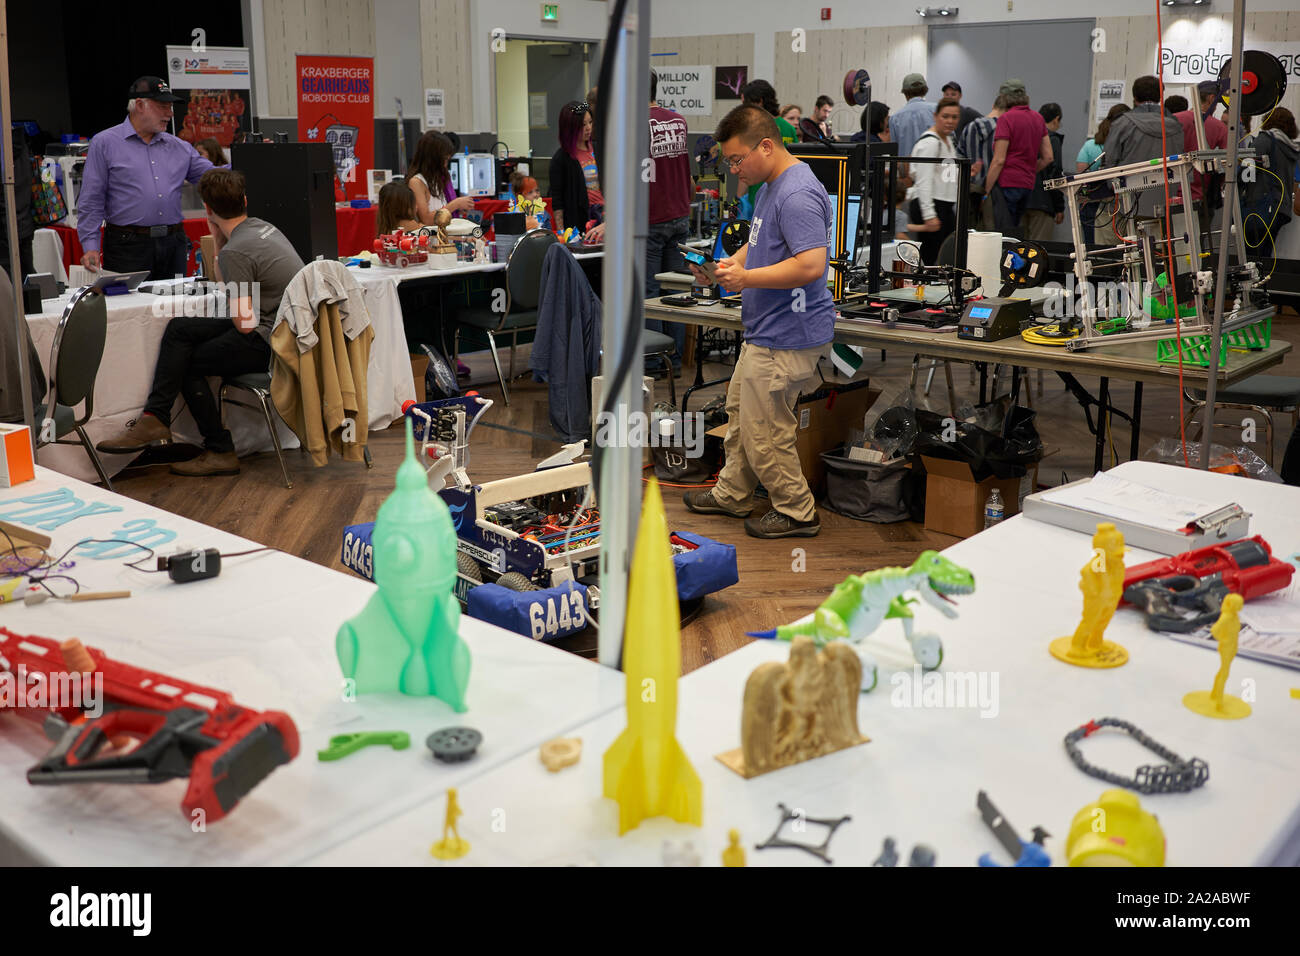 3D printing enthusiasts gather at the Portland Mini Maker Faire held in OMSI, a science museum in Portland, Oregon, on Sunday, Sep 8, 2019. Stock Photo